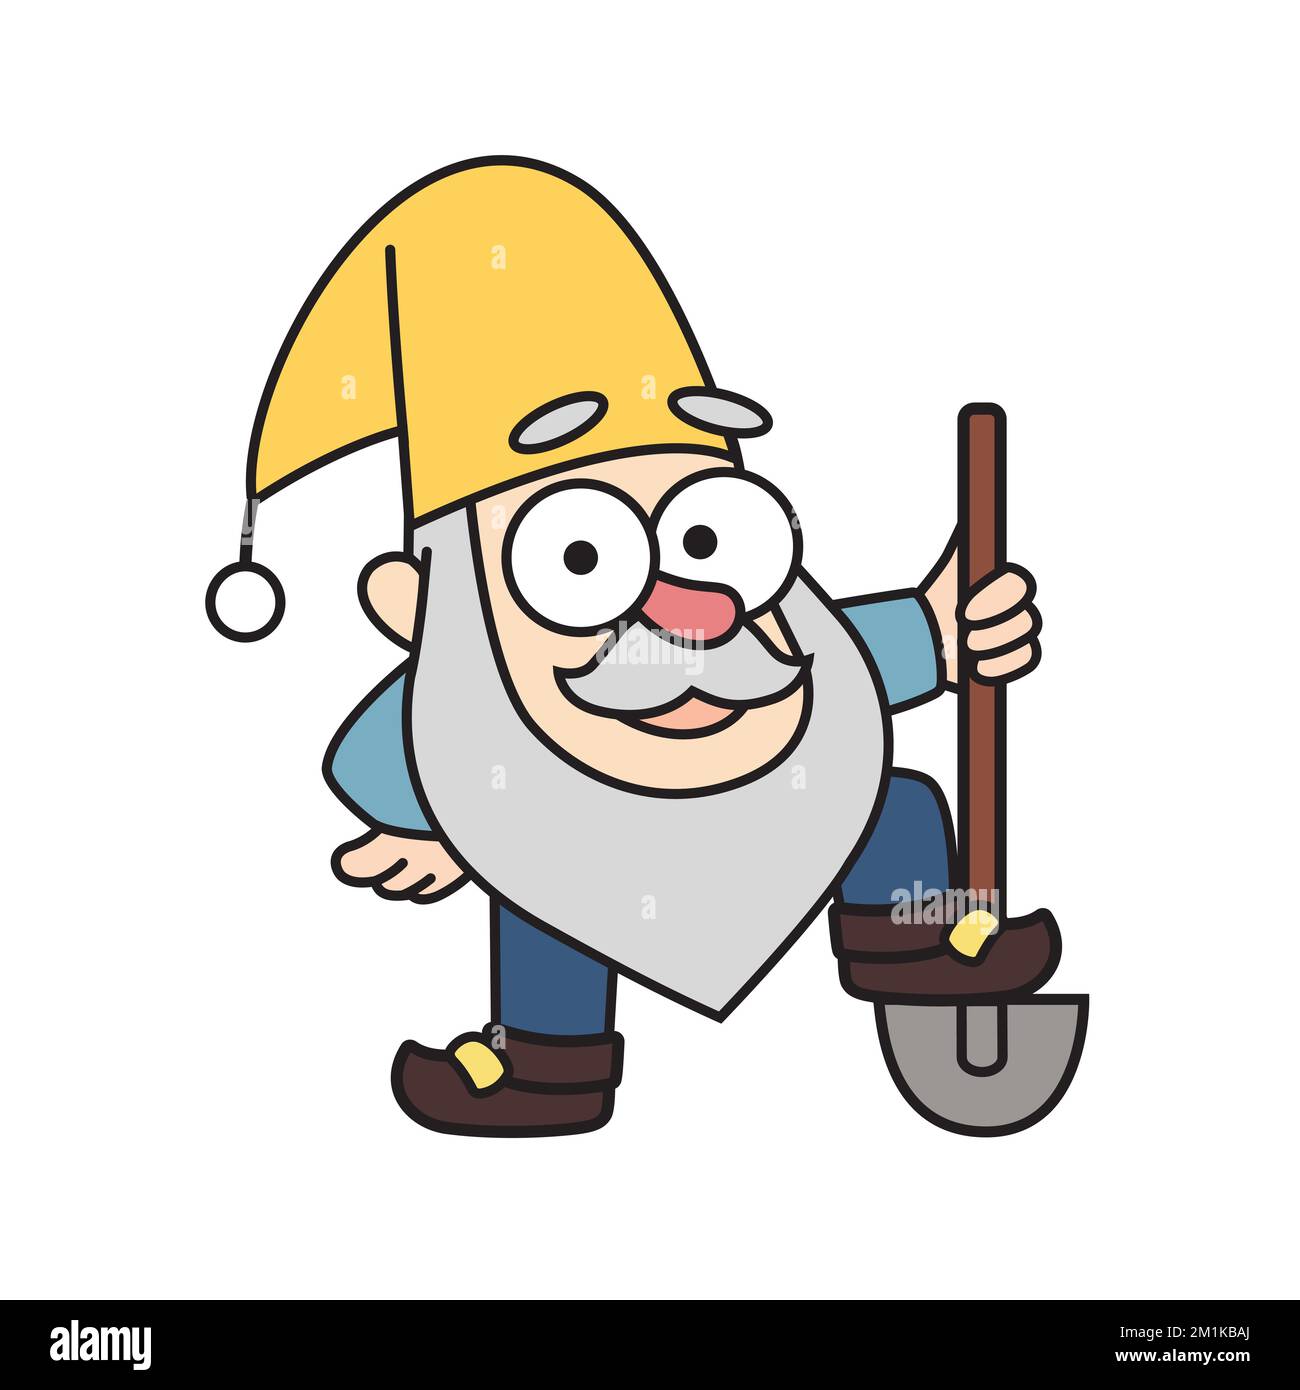 Cheerful little garden gnome, dwarf, oldman, gardener is holding a shovel in cartoon style. Colorful vector fairytale kids illustration, drawing character, mascot, sticker Stock Vector